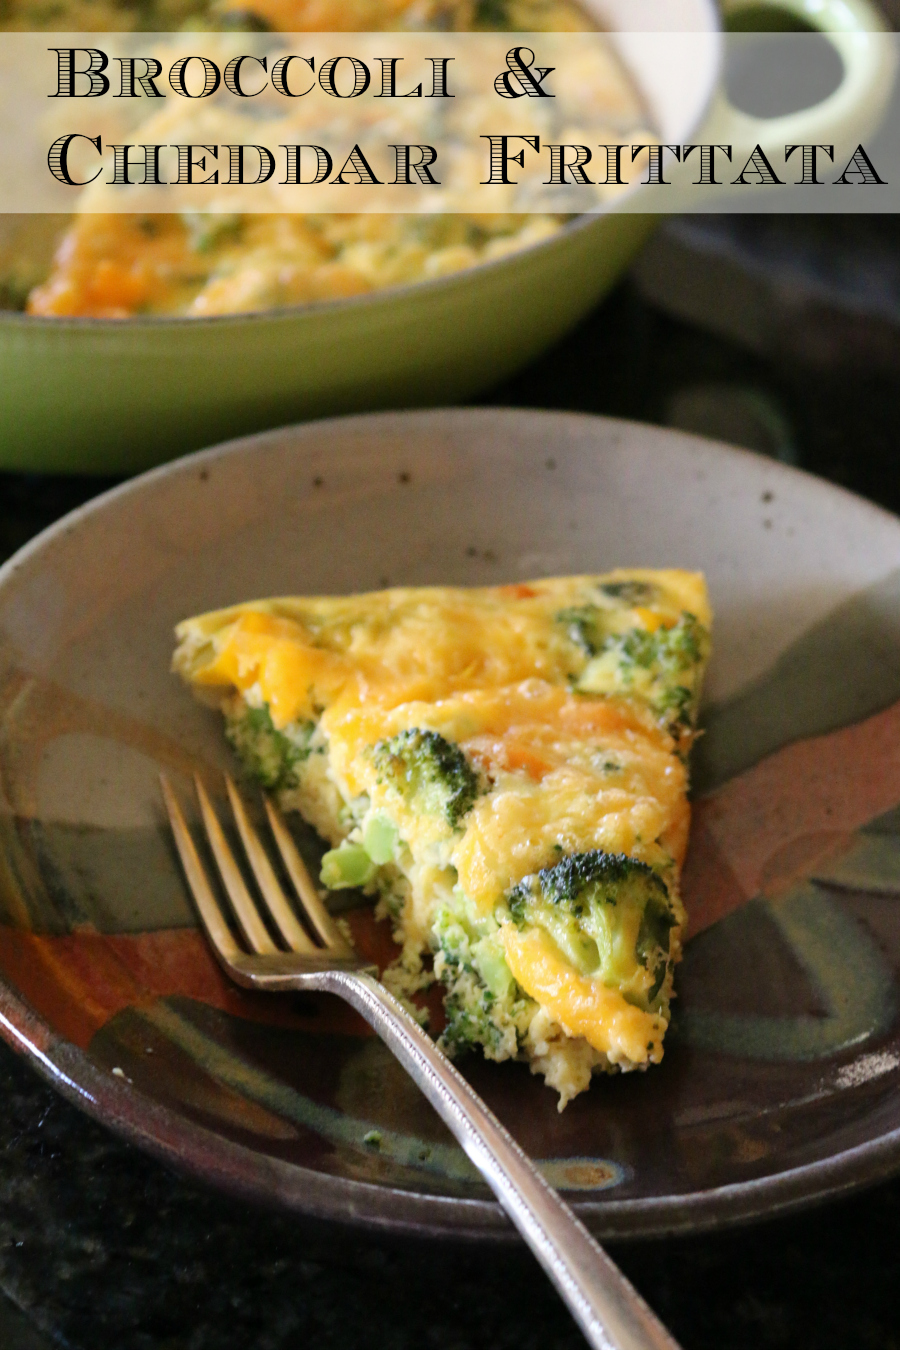 Simple and Easy Recipe for Cast Iron Broccoli and Cheddar Frittata. The perfect brunch recipe or a great light dinner option served with a nice side salad.